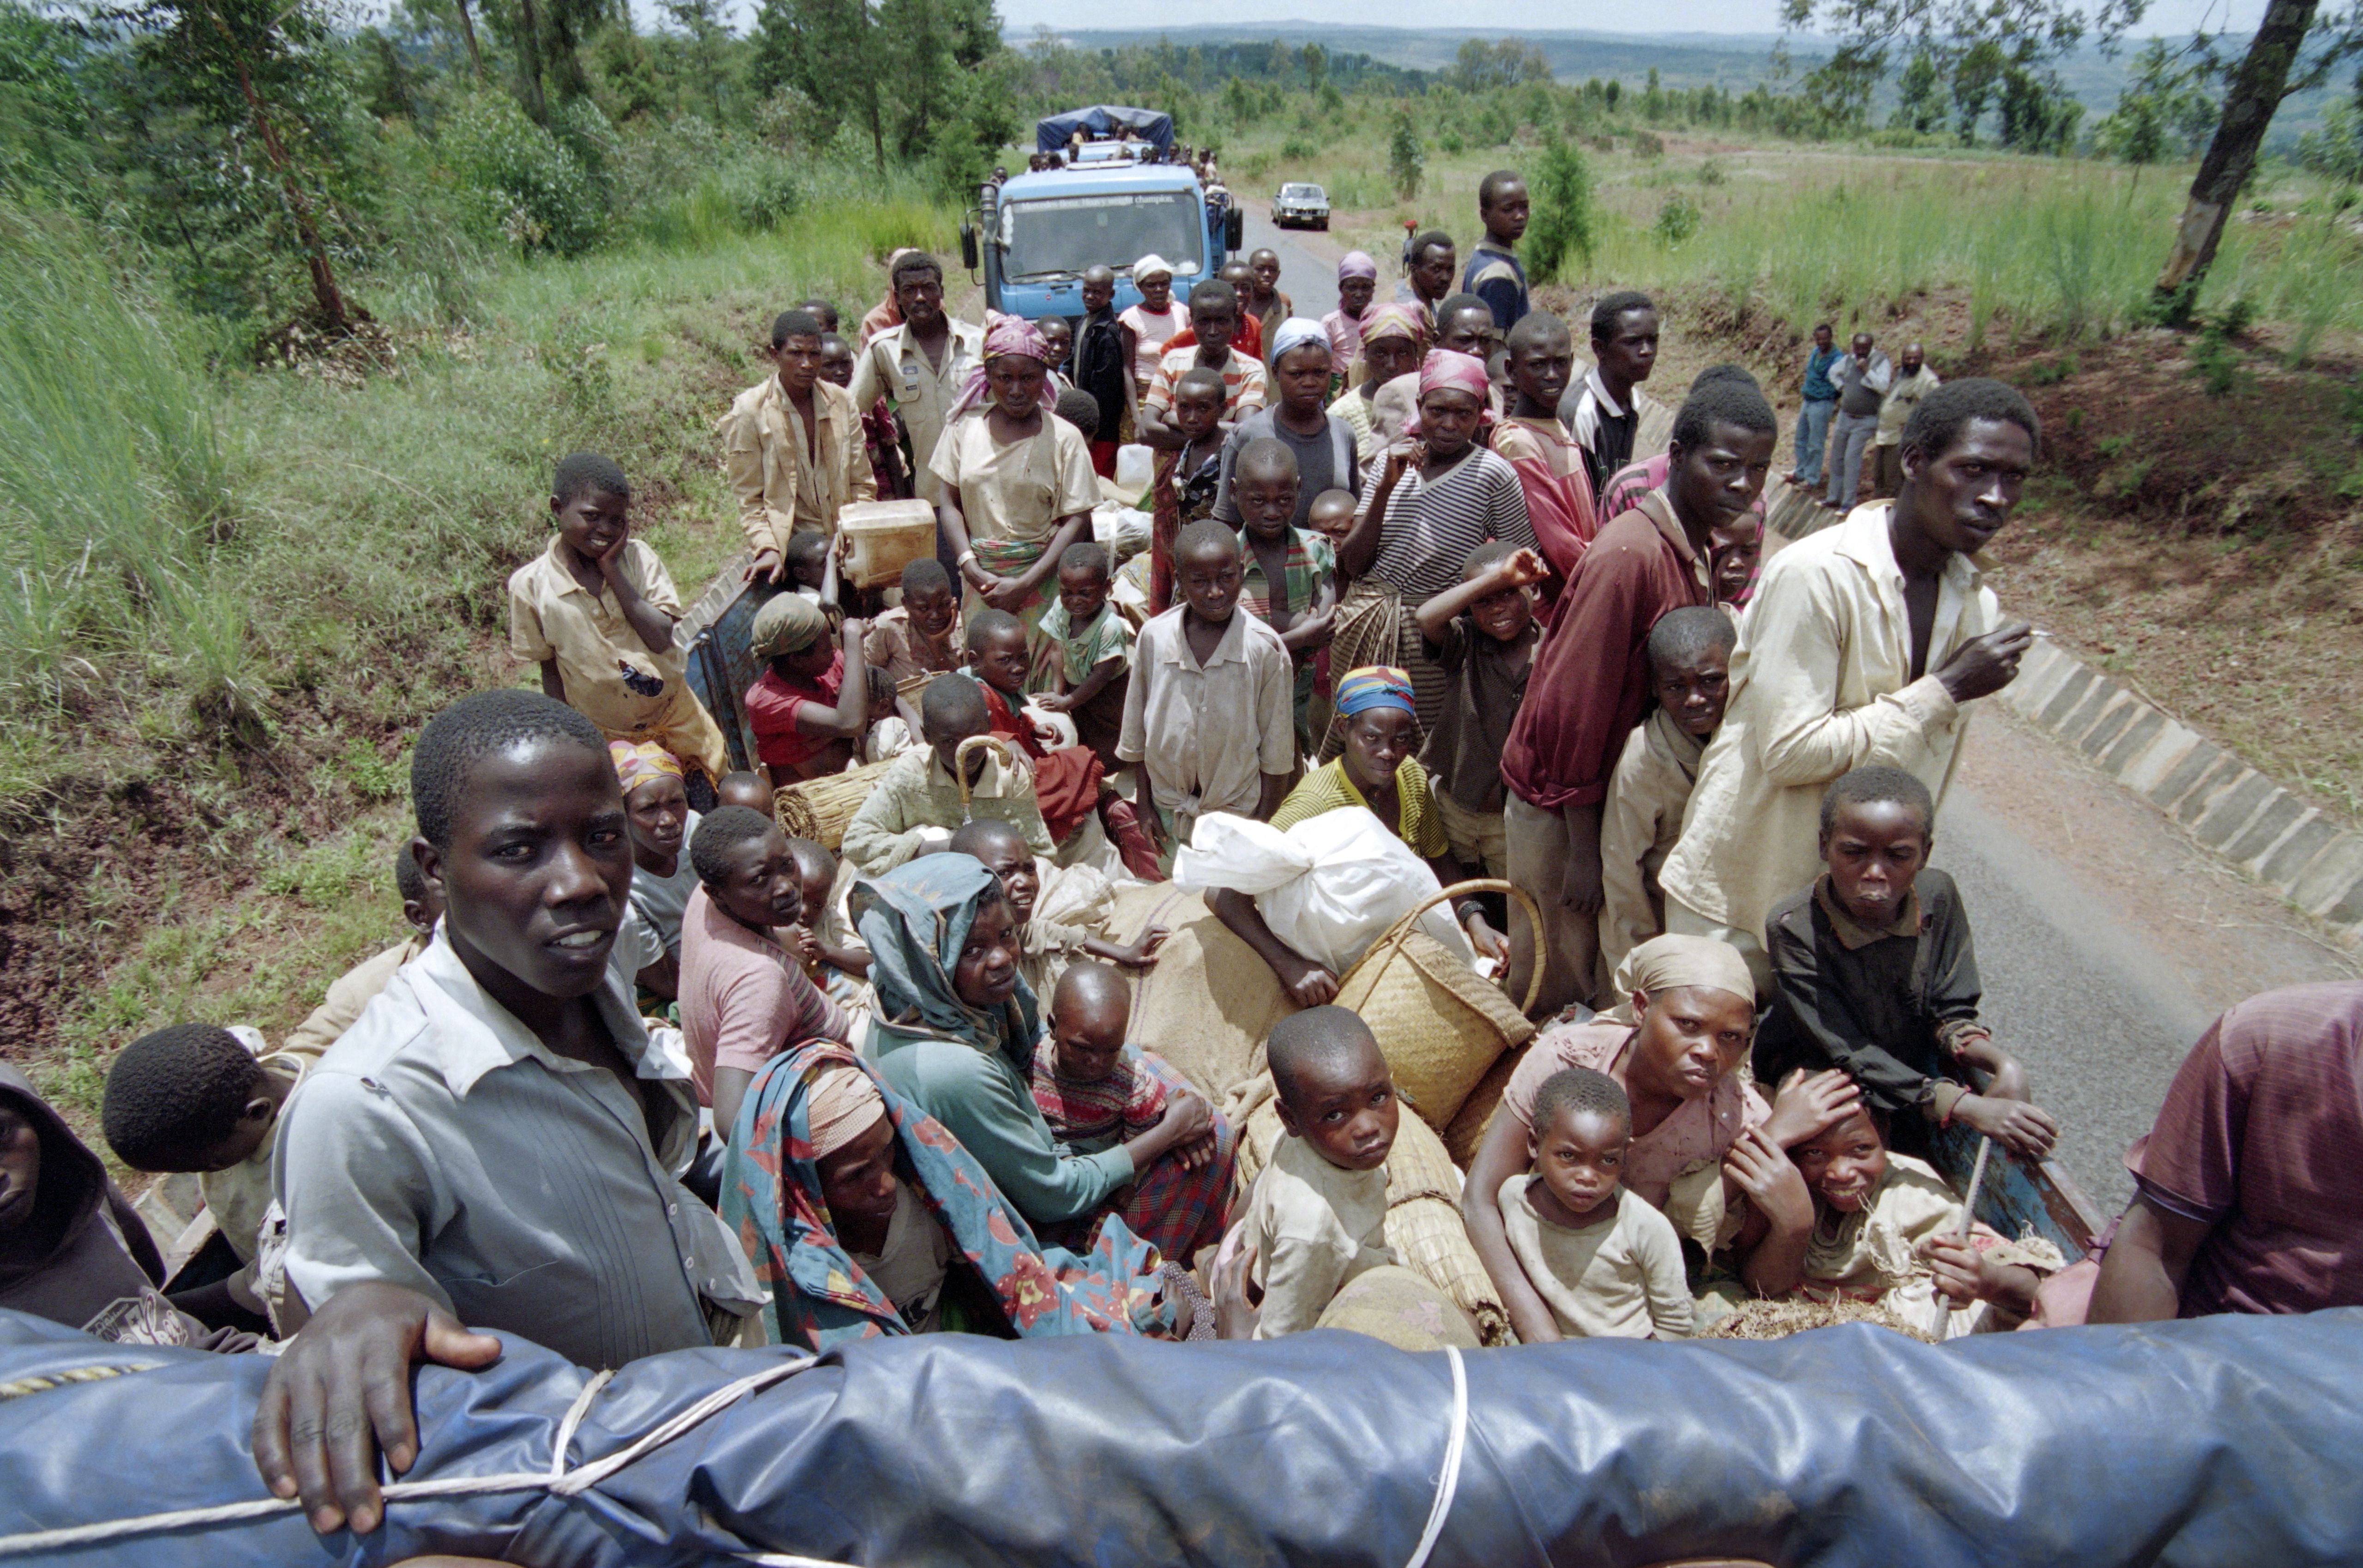 A UN convoy with 300 Rwandan Hutu refugees is held up by Burundian soldiers in April 1995